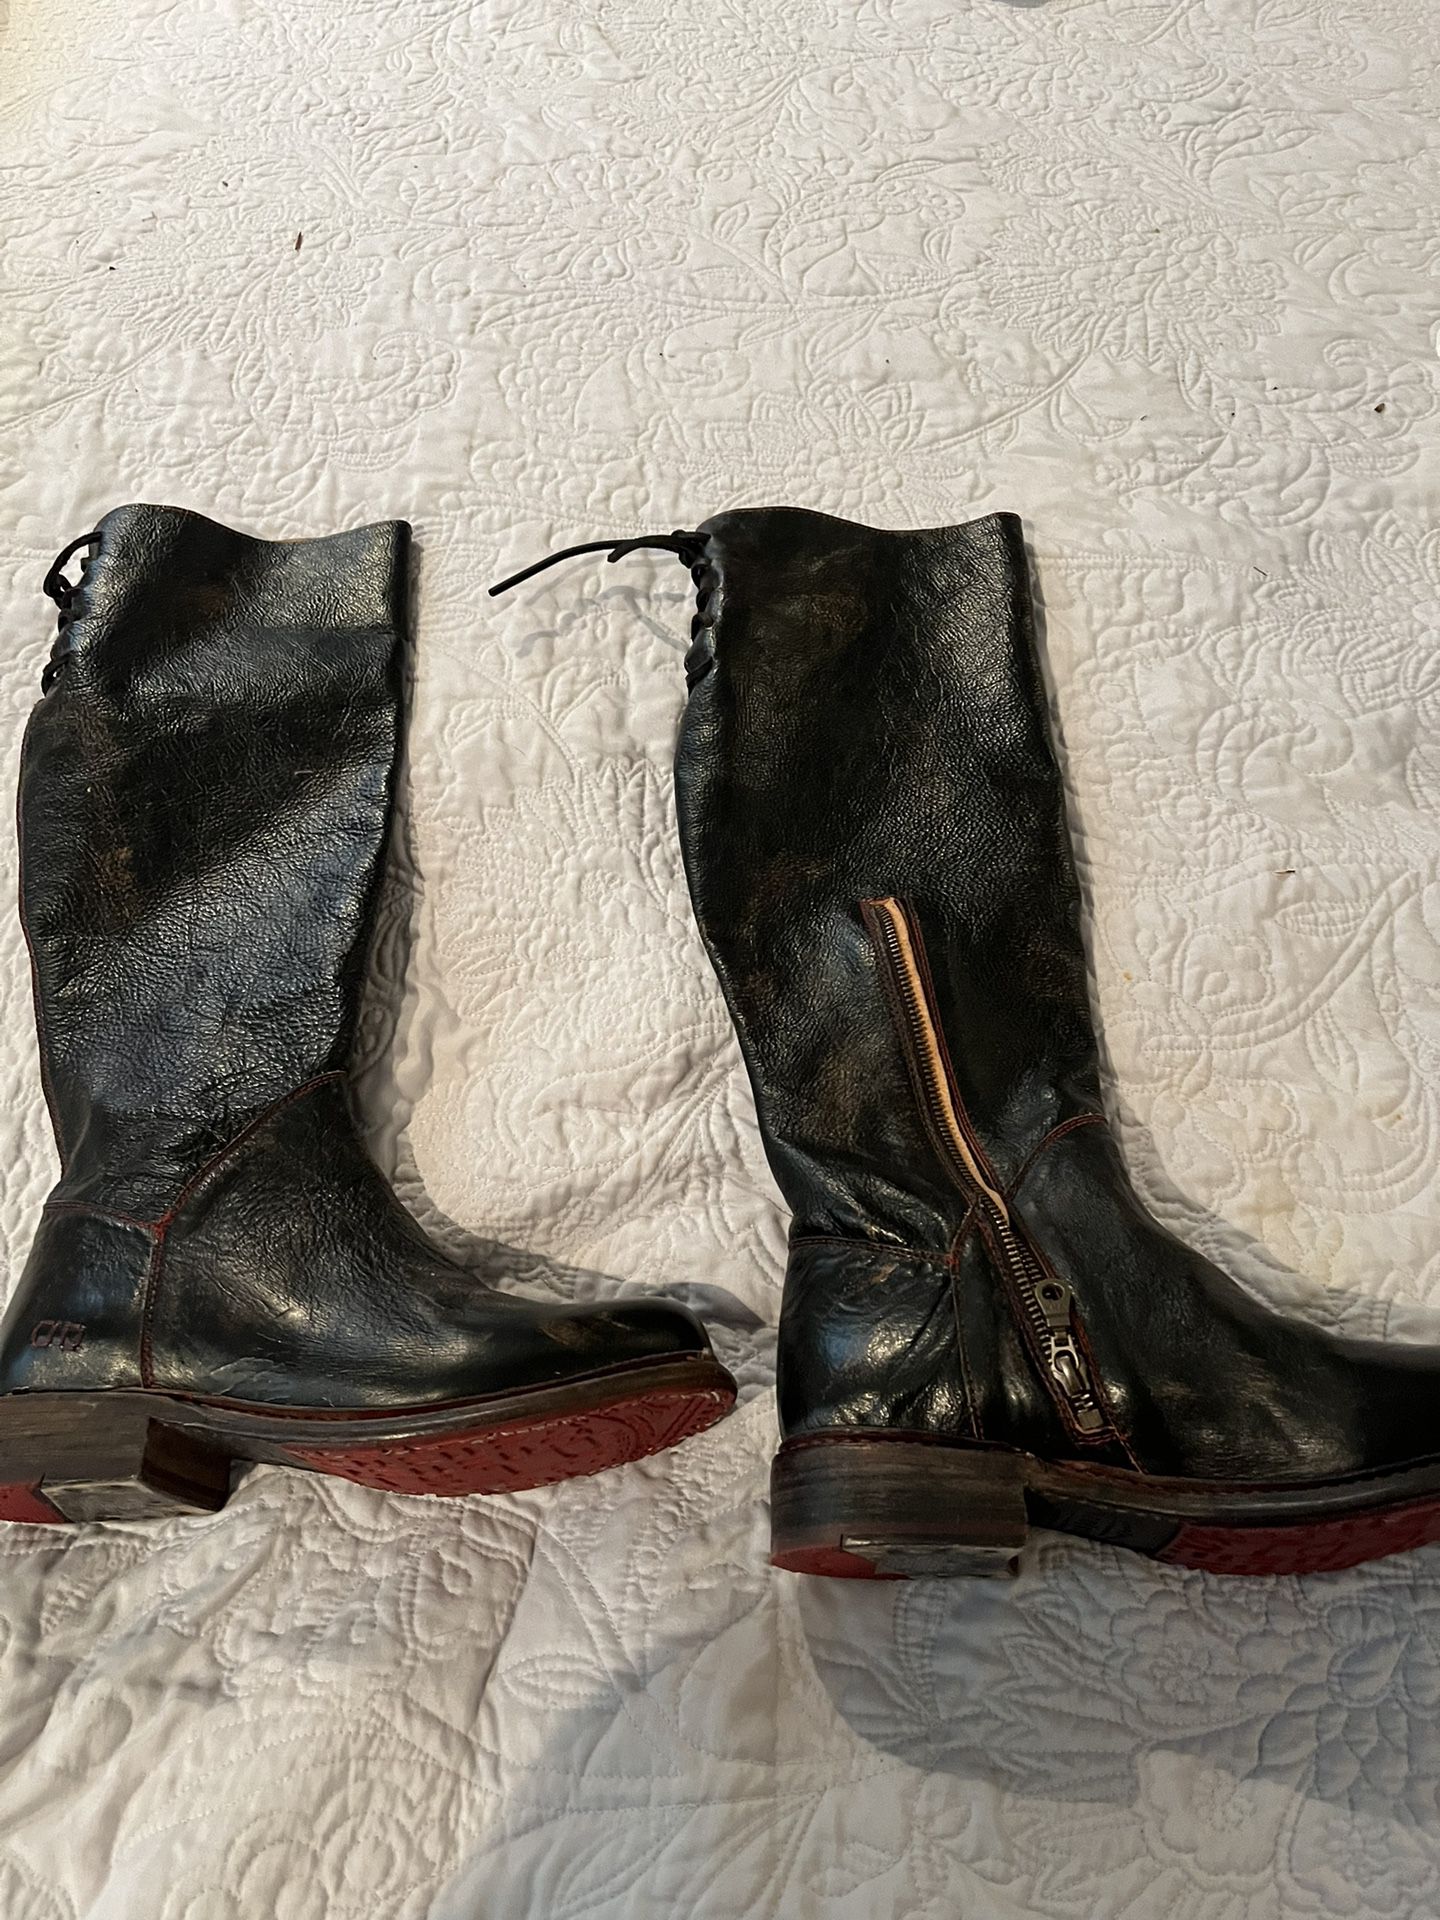 Bed Stu Leather Boots 8.5w